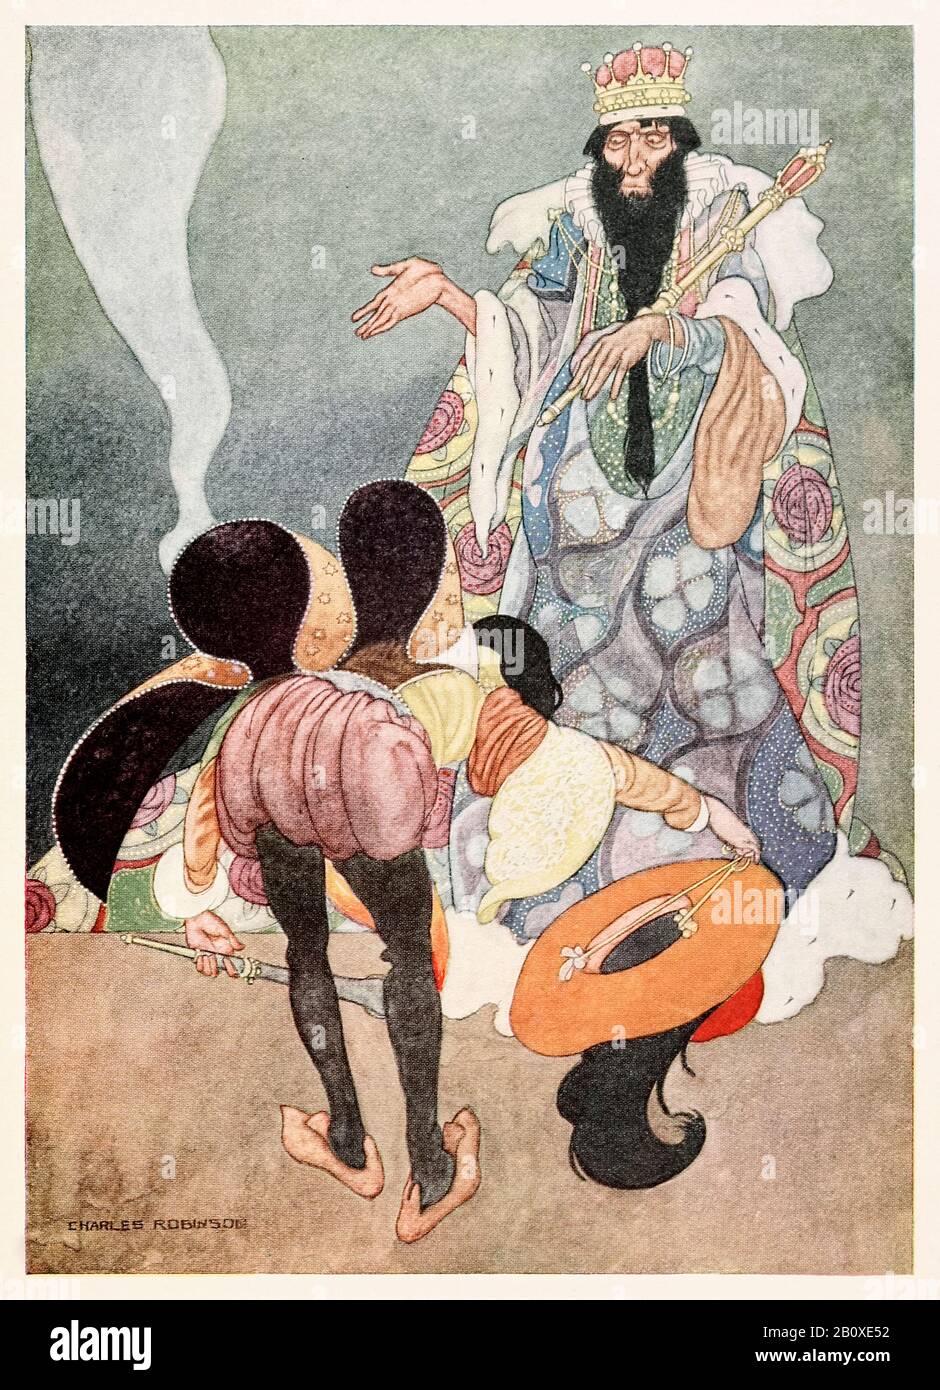 “Let the fireworks being said the King” from ‘The Remarkable Rocket’ in The Happy Prince and Other Tales by Oscar Wilde (1854-1900) illustrated by Charles Robinson (1870-1937). See more information below. Stock Photo